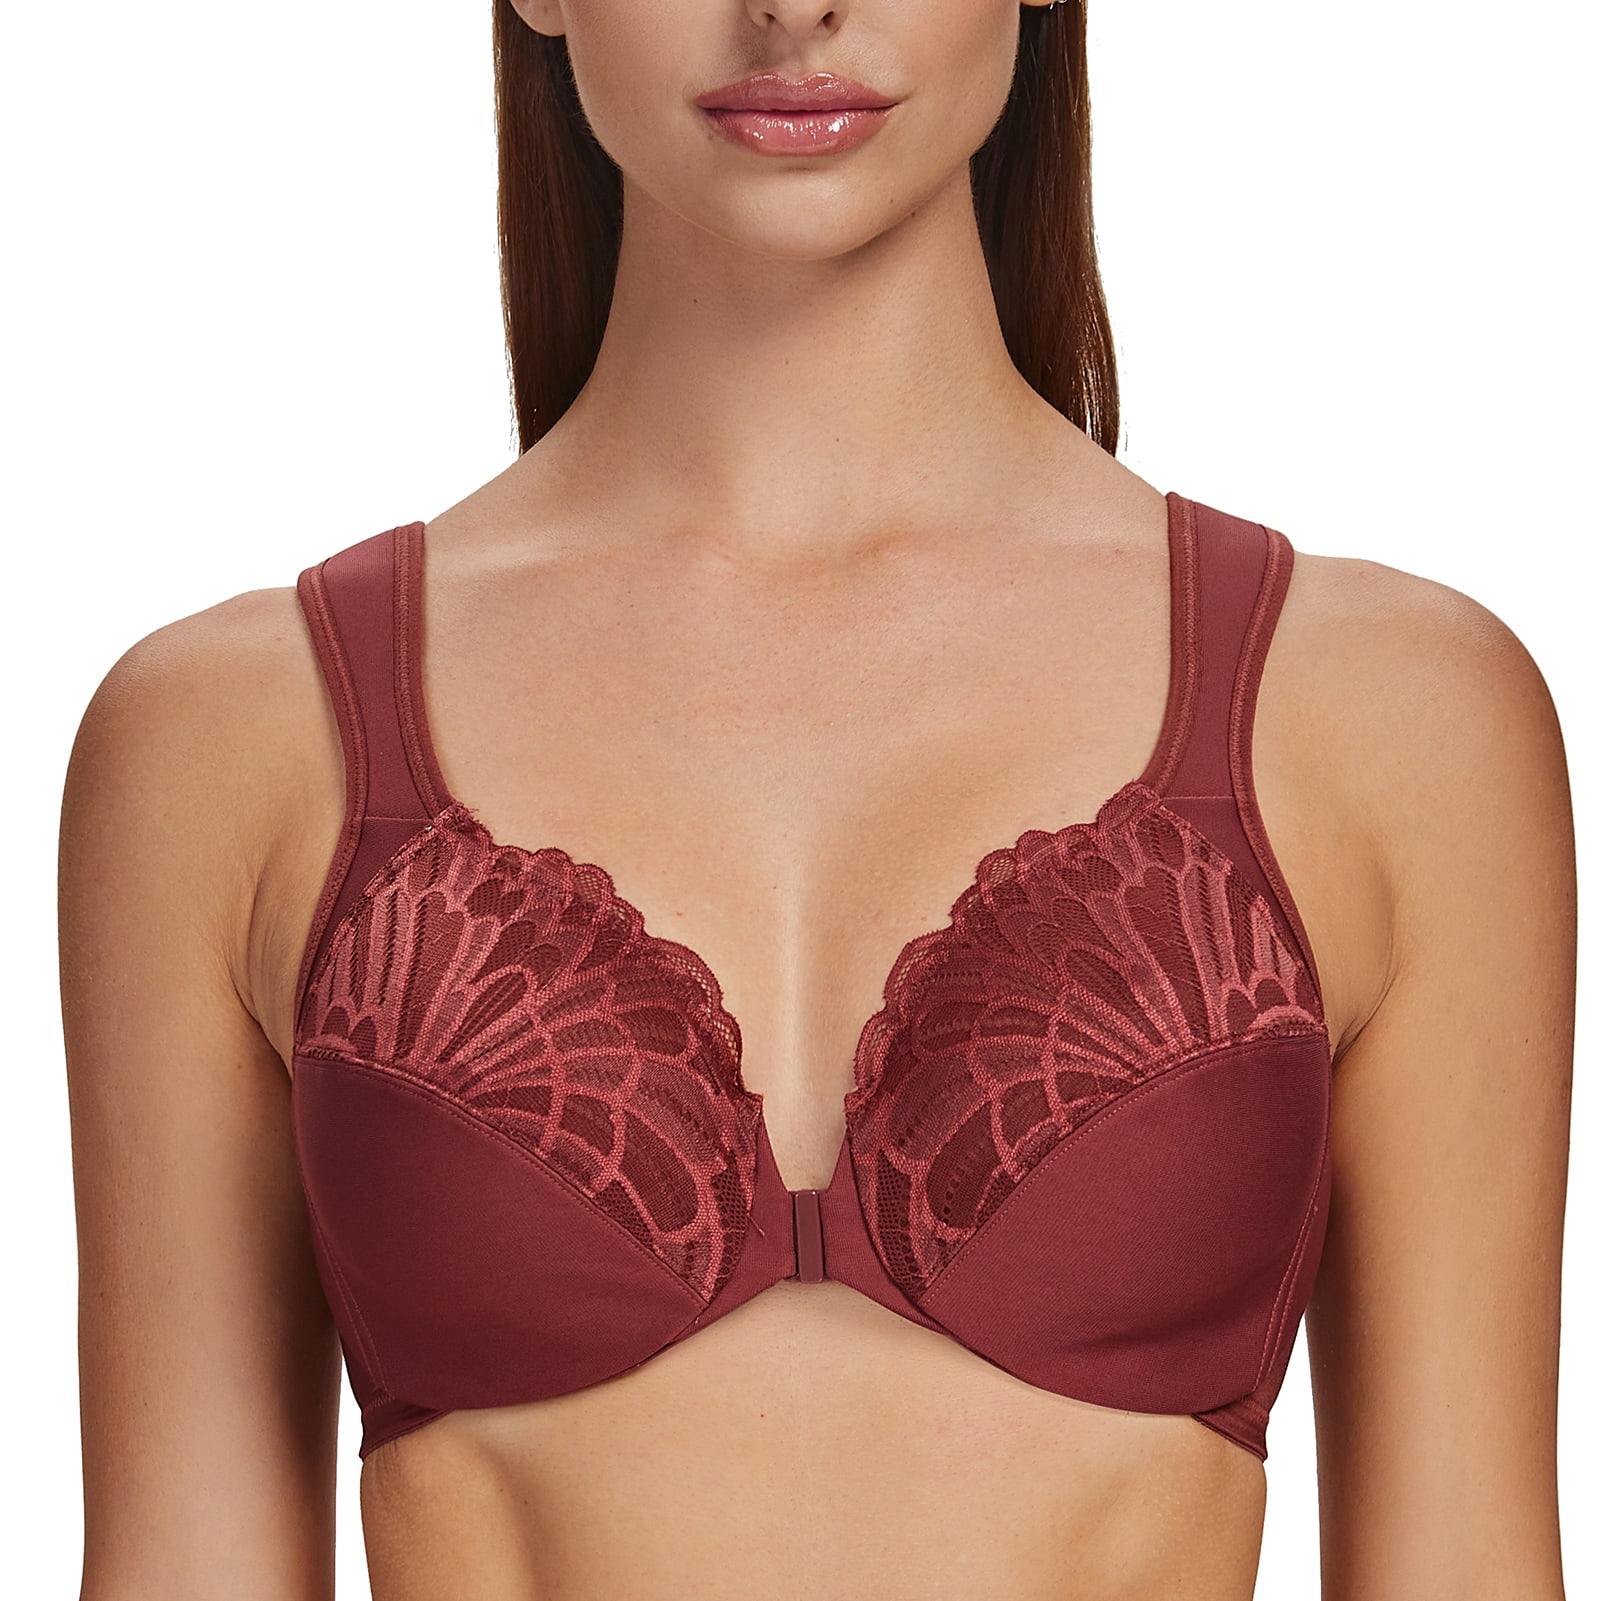 MELENECA Underwire Front Closure Bras for Women Cabernet Red 42B 